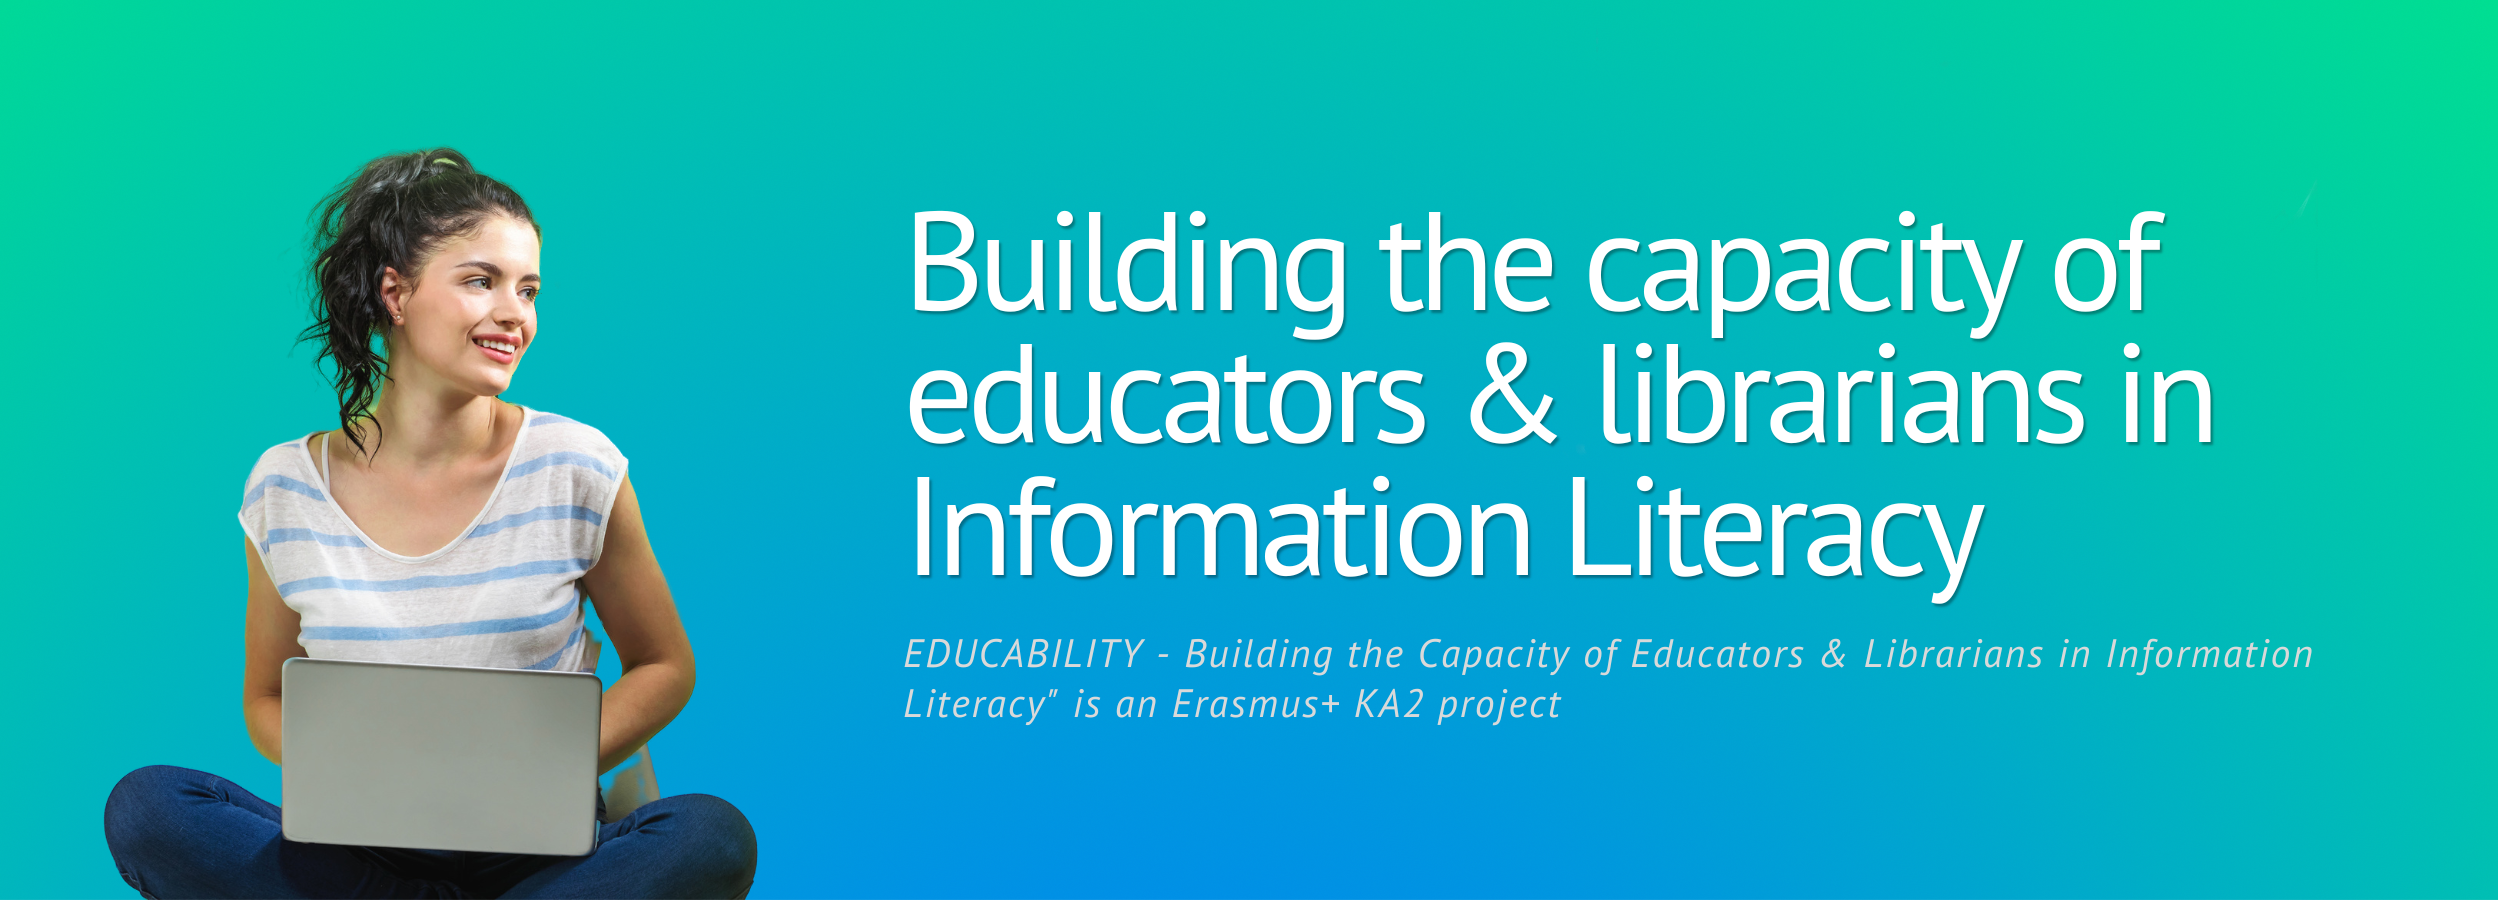 EDUCABILITY - Building the Capacity of Educators & Librarians in Information Literacy" is an Erasmus+ KA2 project